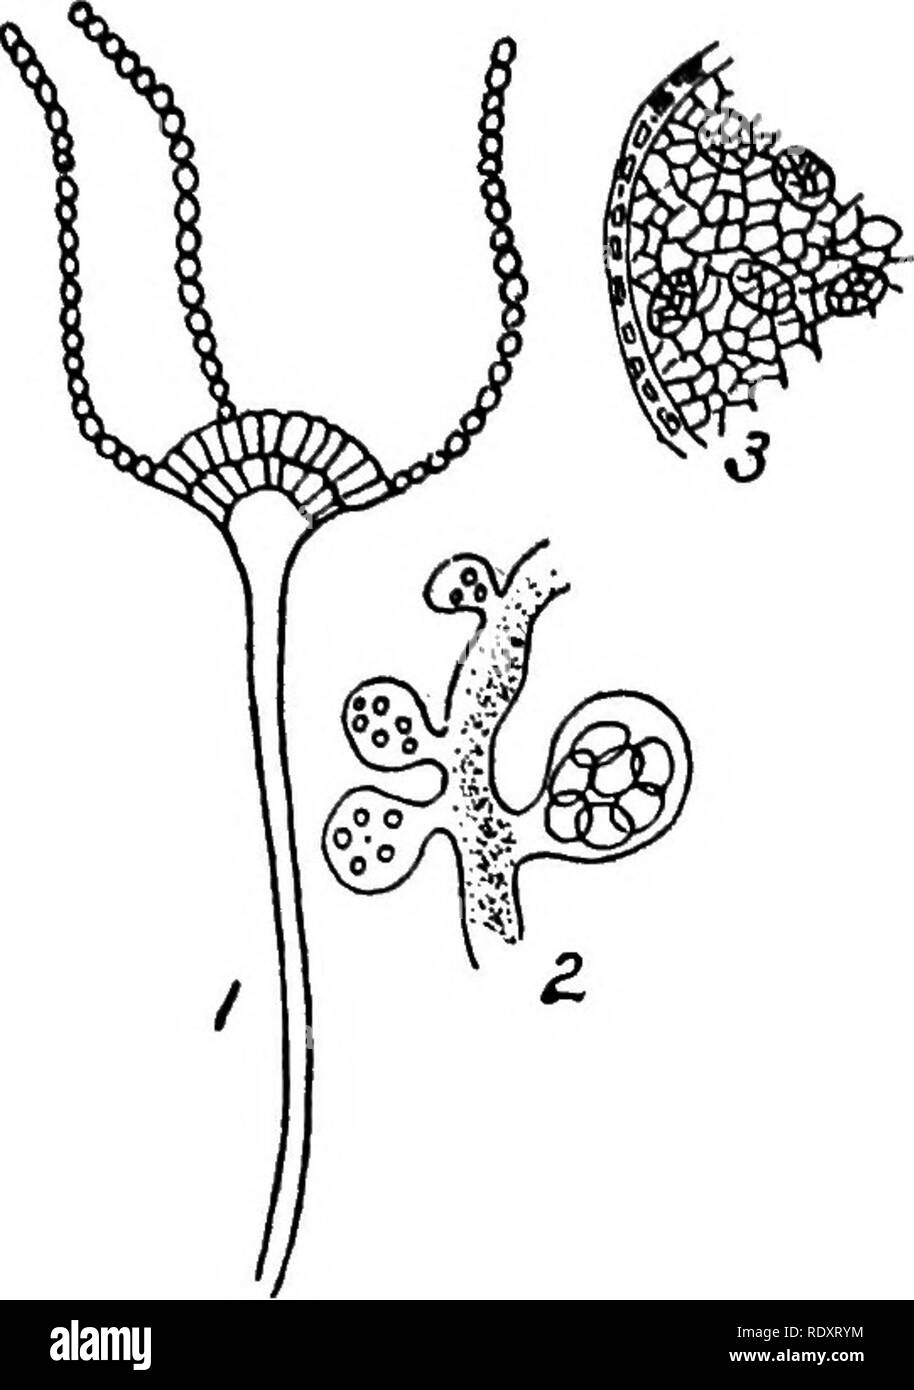 . A manual of poisonous plants, chiefly of eastern North America, with brief notes on economic and medicinal plants, and numerous illustrations. Poisonous plants. ASCOMYCETES—EUASCI—ASPERGILLUS 267. Fig. 89a. Aspergillus nidulans. 1. Conidiophore. 2. Branch of mycelium with asci and ascospores, magnified. 2. Asci. 3. Cross section. Ascus. All greatly magnified. (After Eidam.). prolonged to form a short tube or beak; numerous transparent asci arise from the base of the perithecium, these contain the ascospores; between the asci slender filiform bodies, called the paraphyses. Polymorphic fungi w Stock Photo